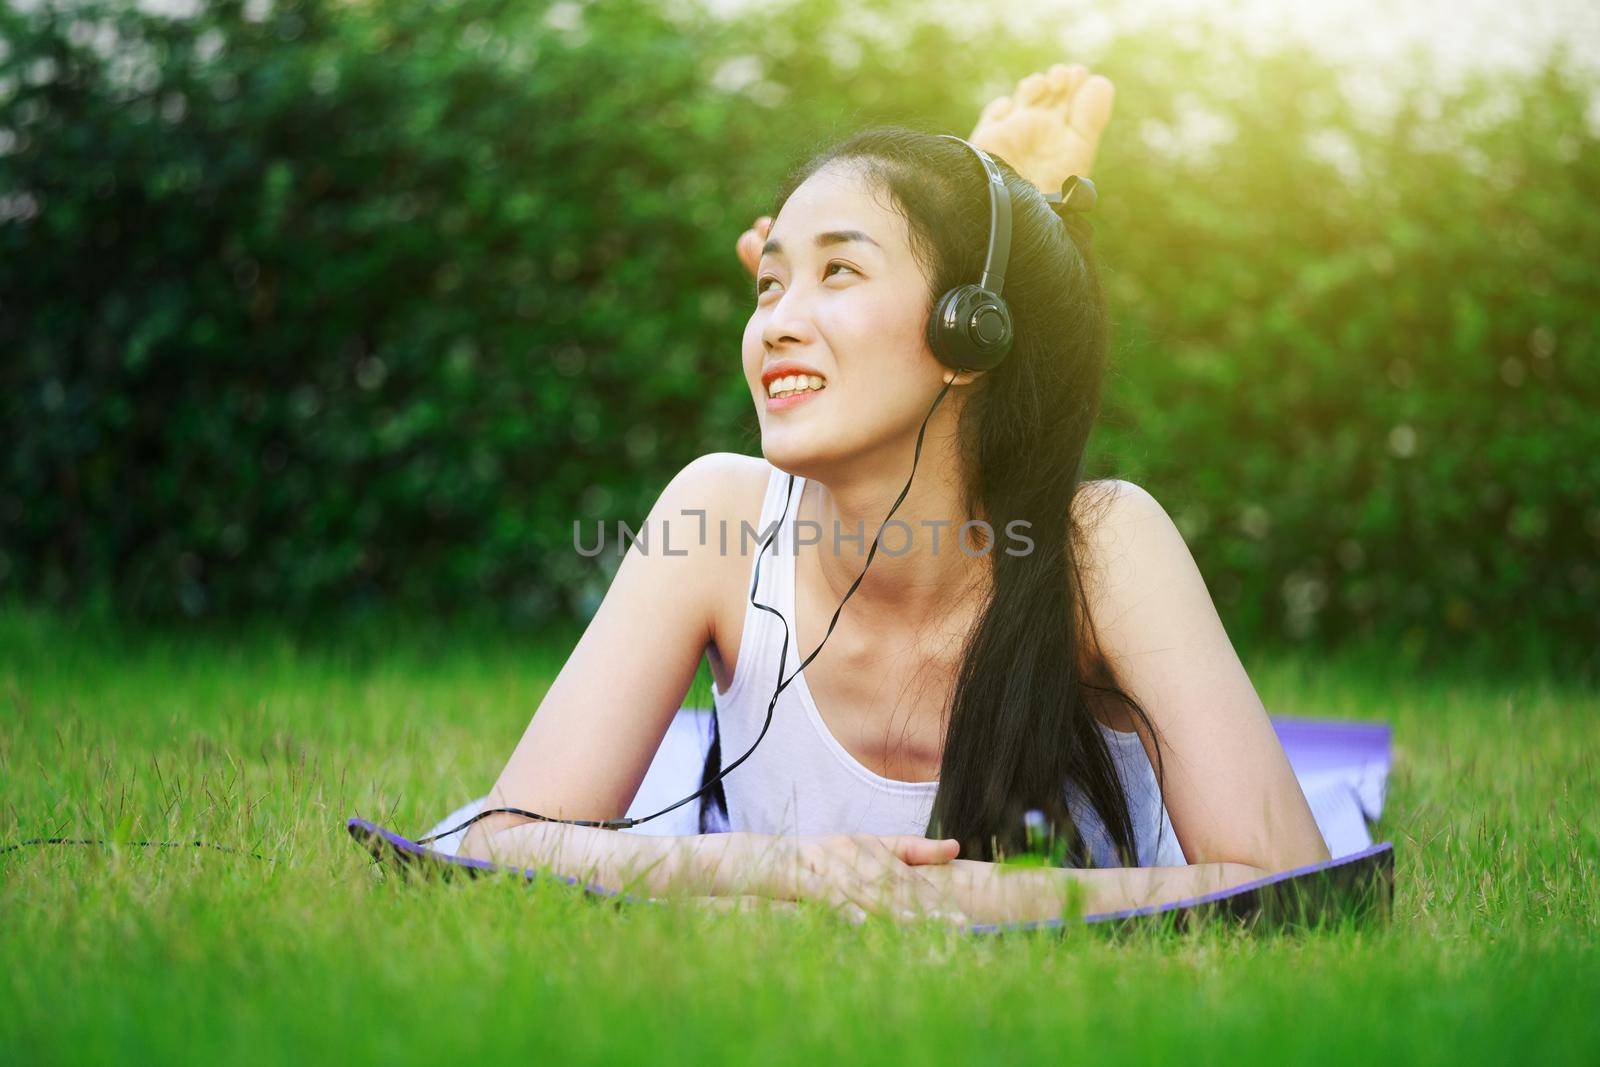 young woman listening to music with headphones and laying on a grass field